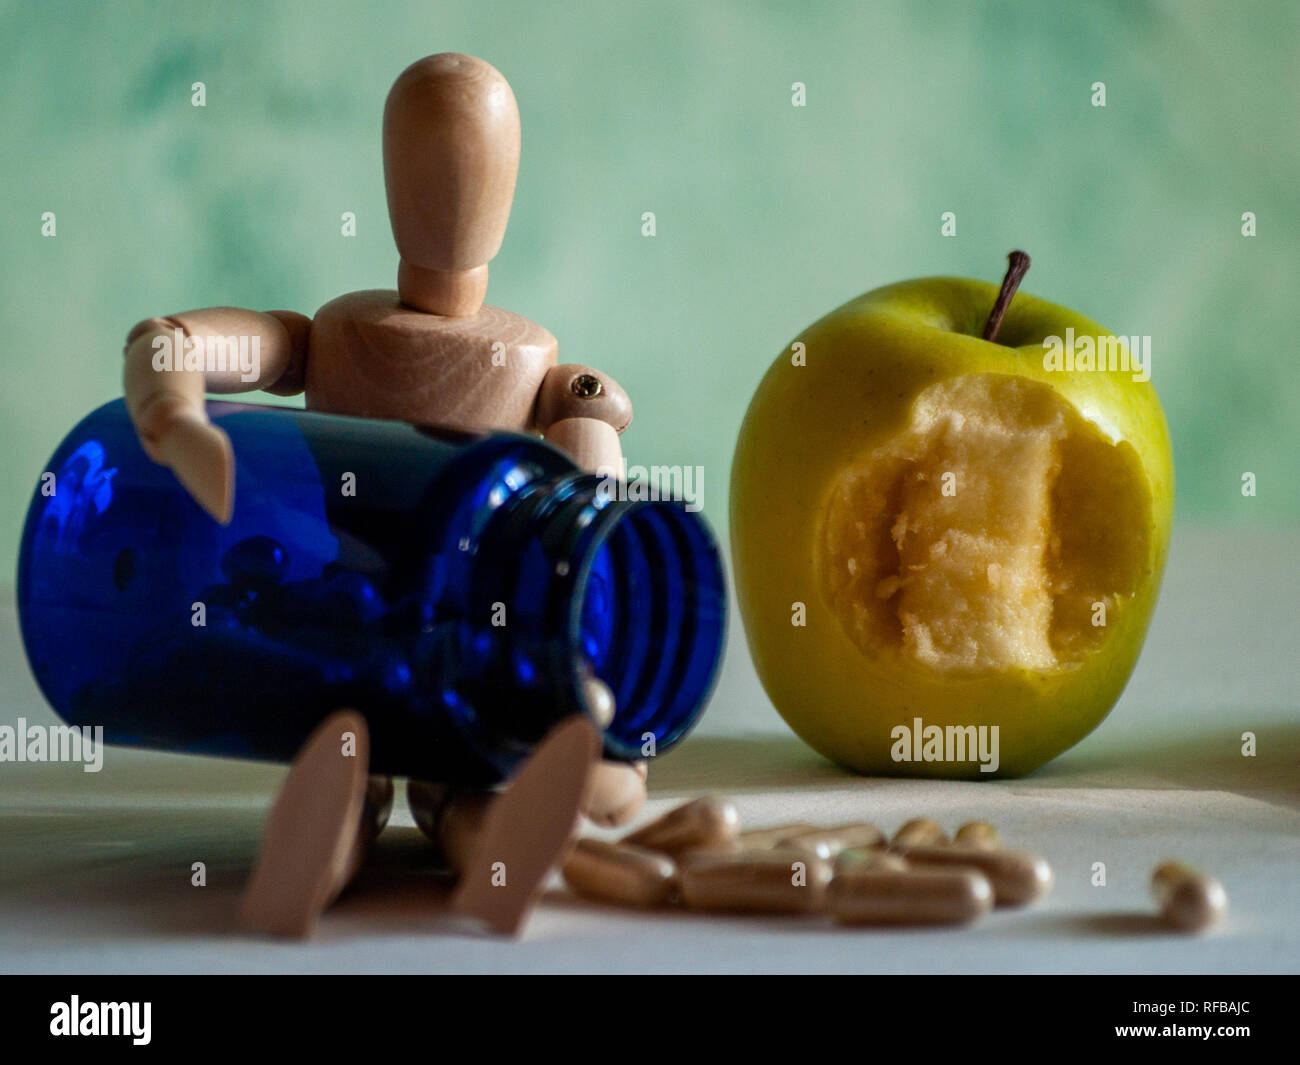 A wooden figurine with a bitten apple and a blue container with vegetable fiber pills on a table Stock Photo